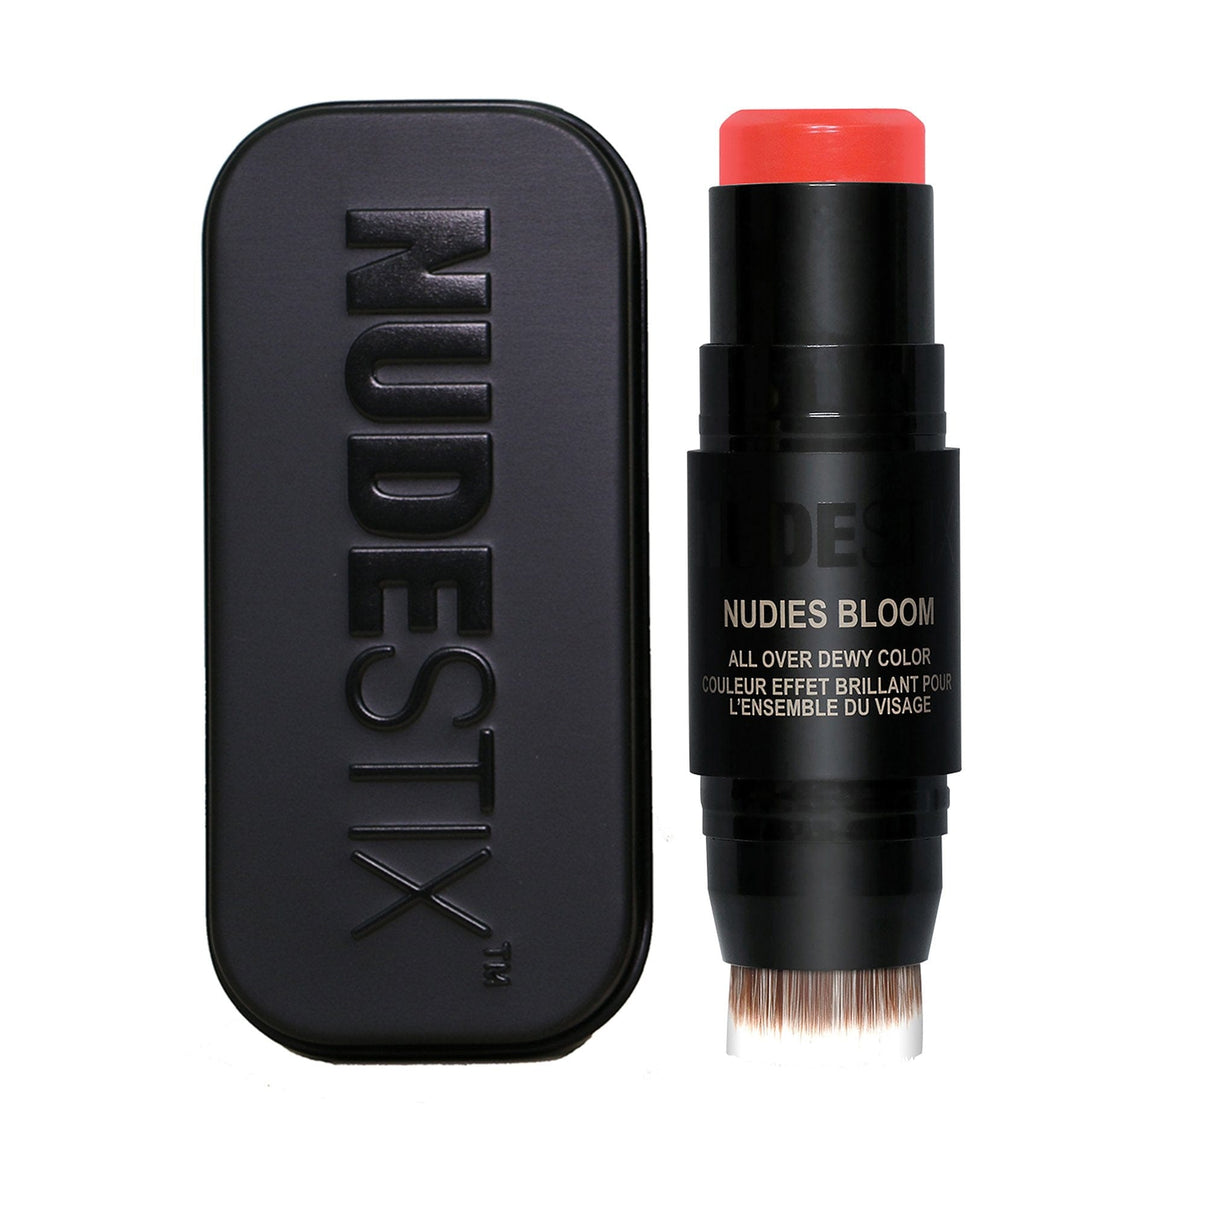 Nudies Bloom in日陰のPoppy Girl with Nudestix can